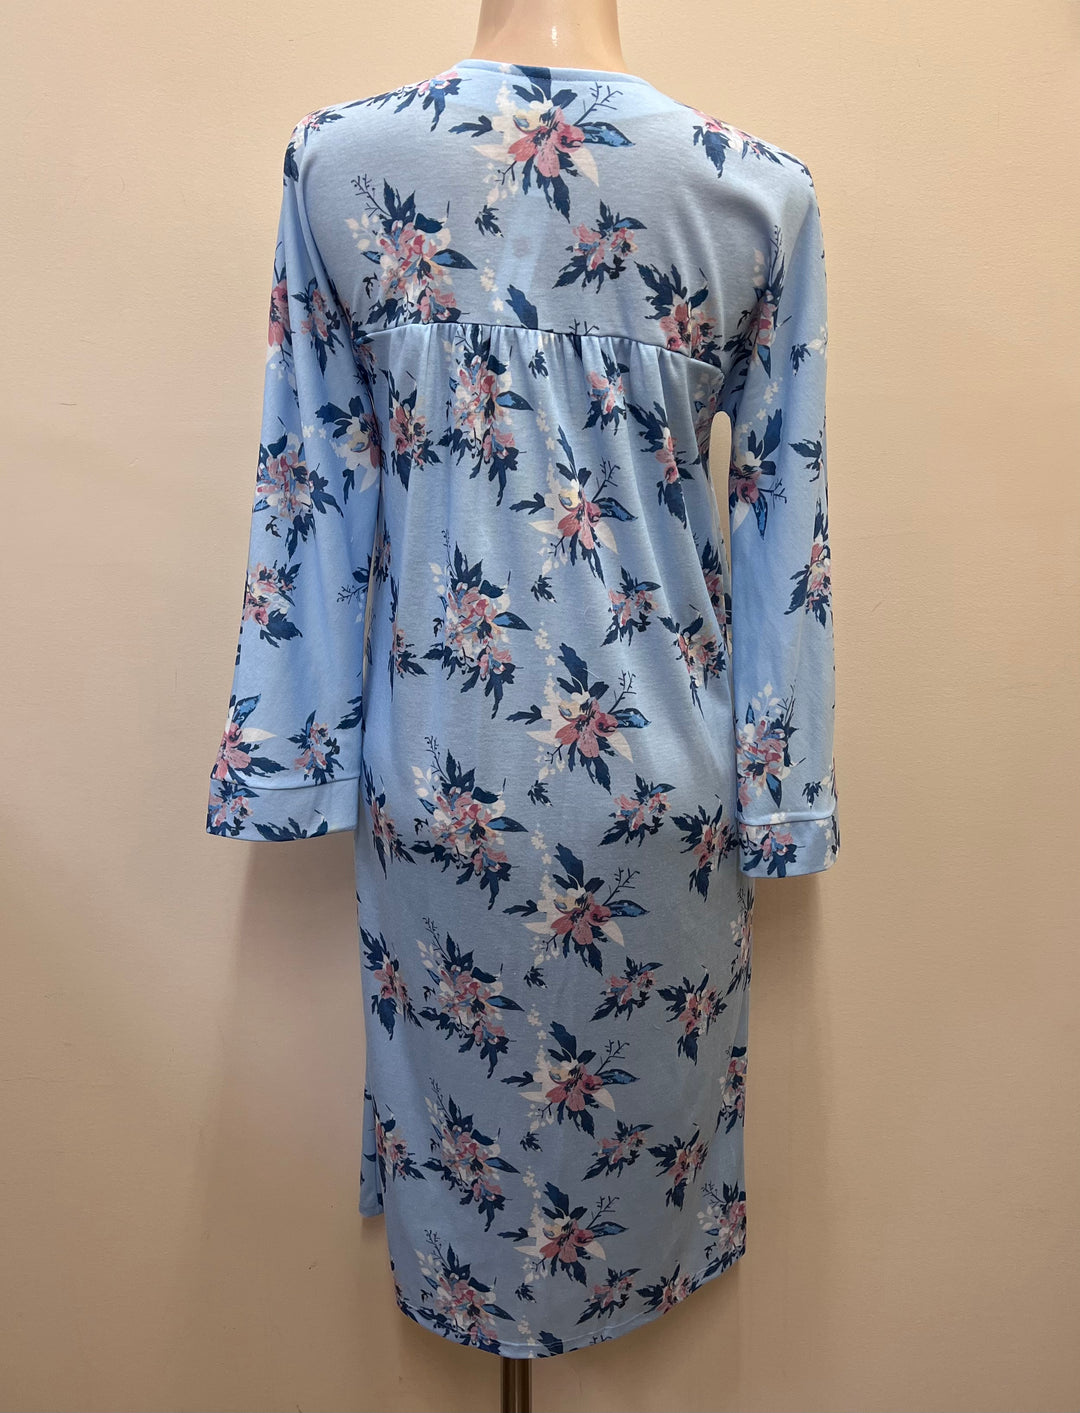 Beatrice Zip Front Floral Robe - Size Large